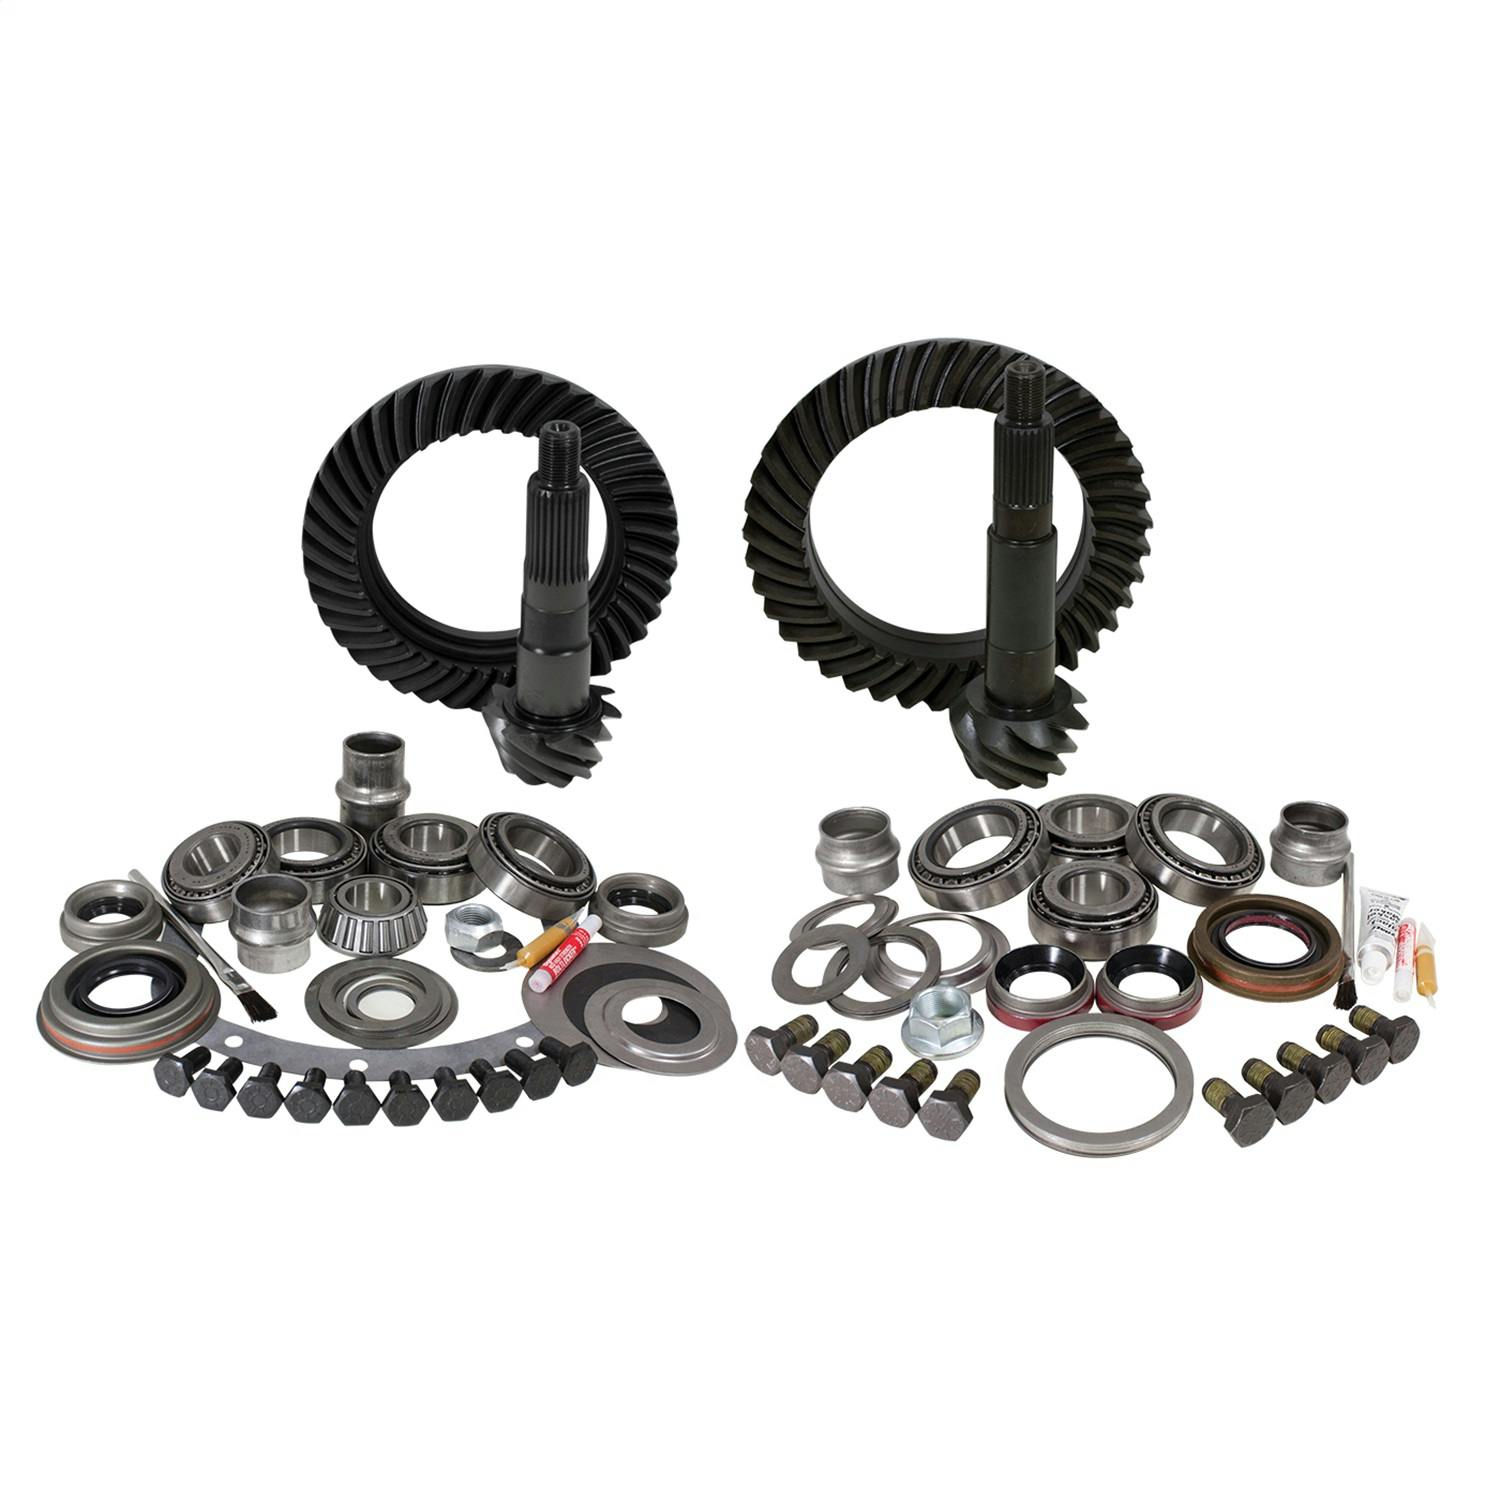 USA Standard Gear ZGK006 Ring And Pinion Set And Complete Install Kit